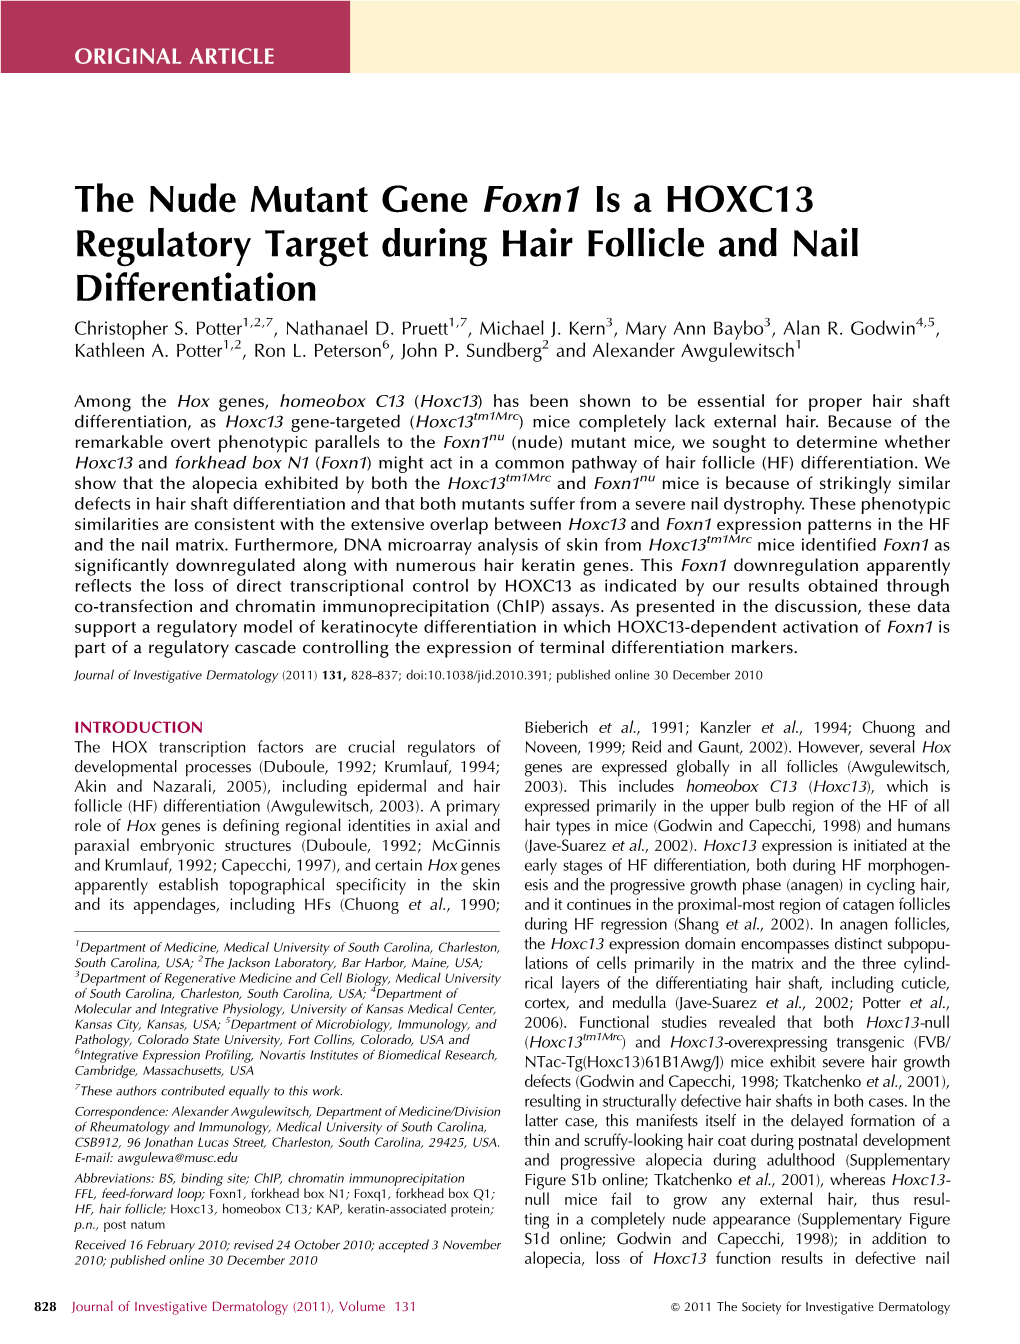 The Nude Mutant Gene Foxn1 Is a HOXC13 Regulatory Target During Hair Follicle and Nail Differentiation Christopher S